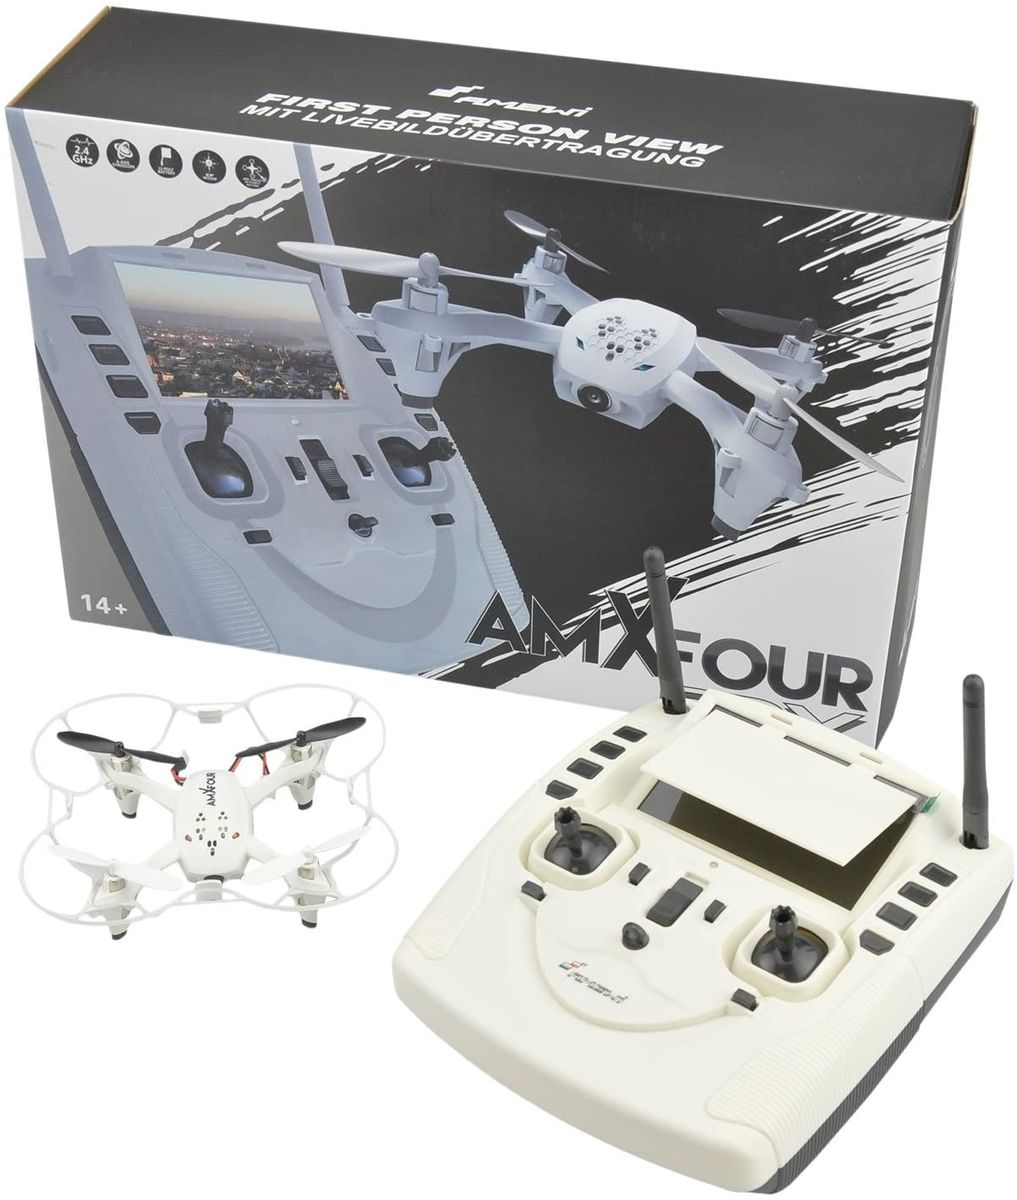 Amewi 25182 AM X Four FPV Copter with Integrated LCD Display, White